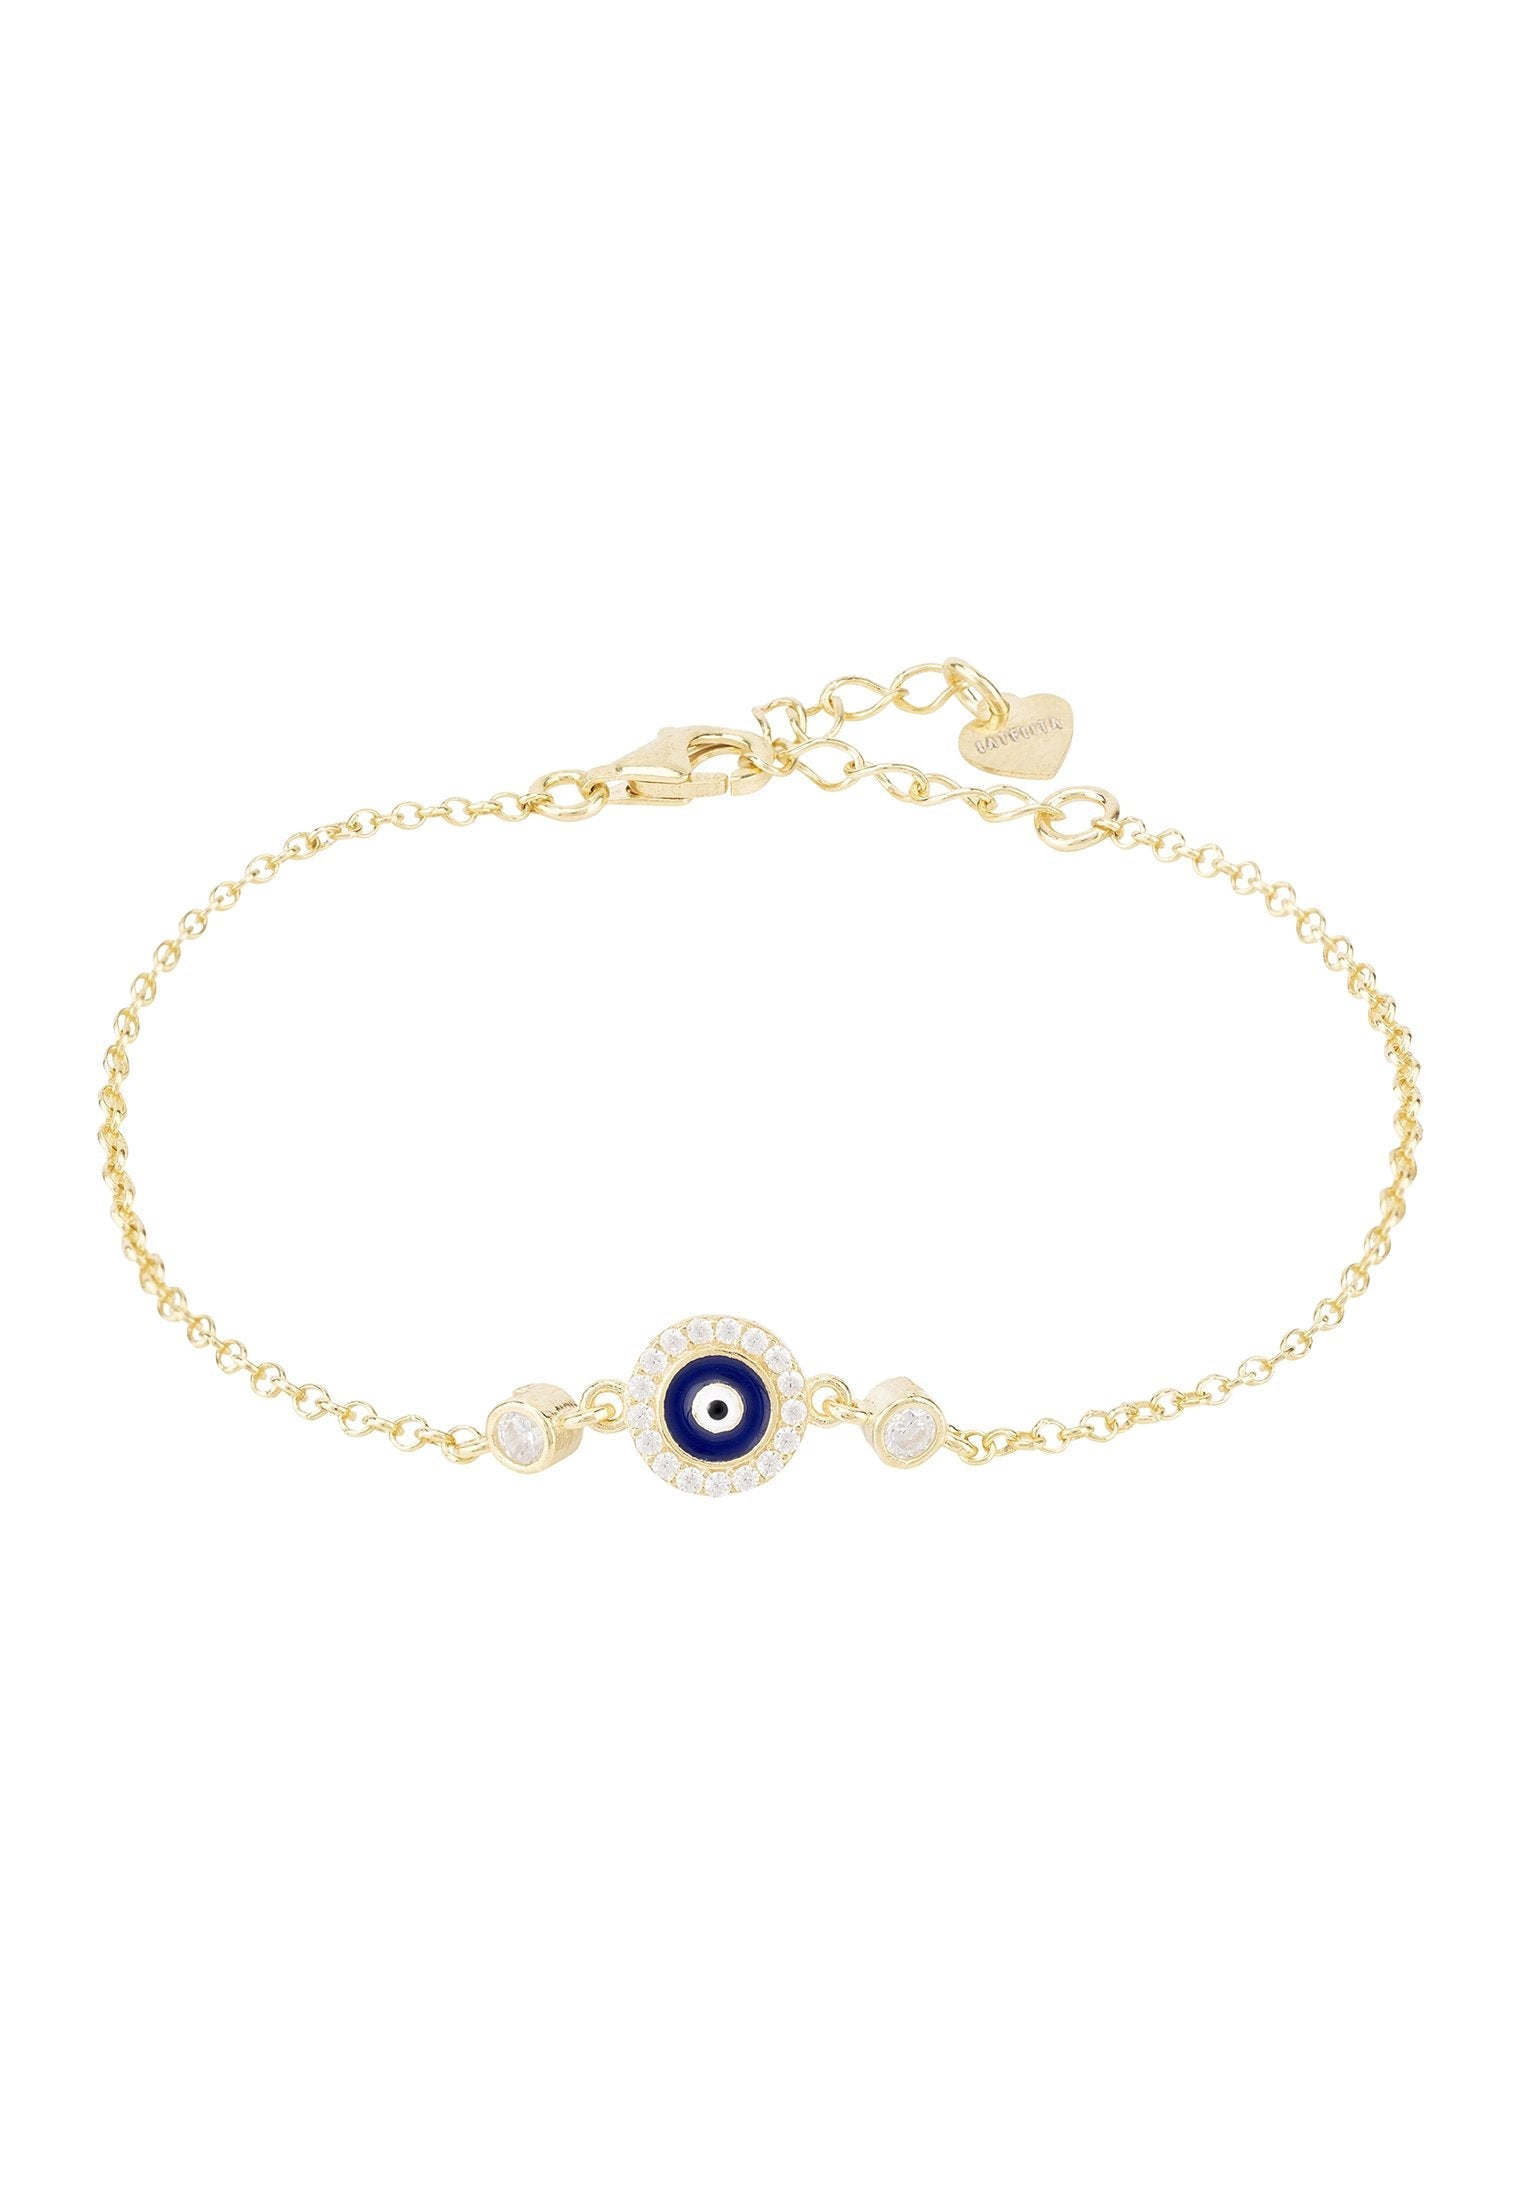 Delicate Evil Eye Enamel Bracelet in Dark Blue and Gold - Handcrafted Sterling Silver with Zircons and Cubic Zirconia Bijou Her